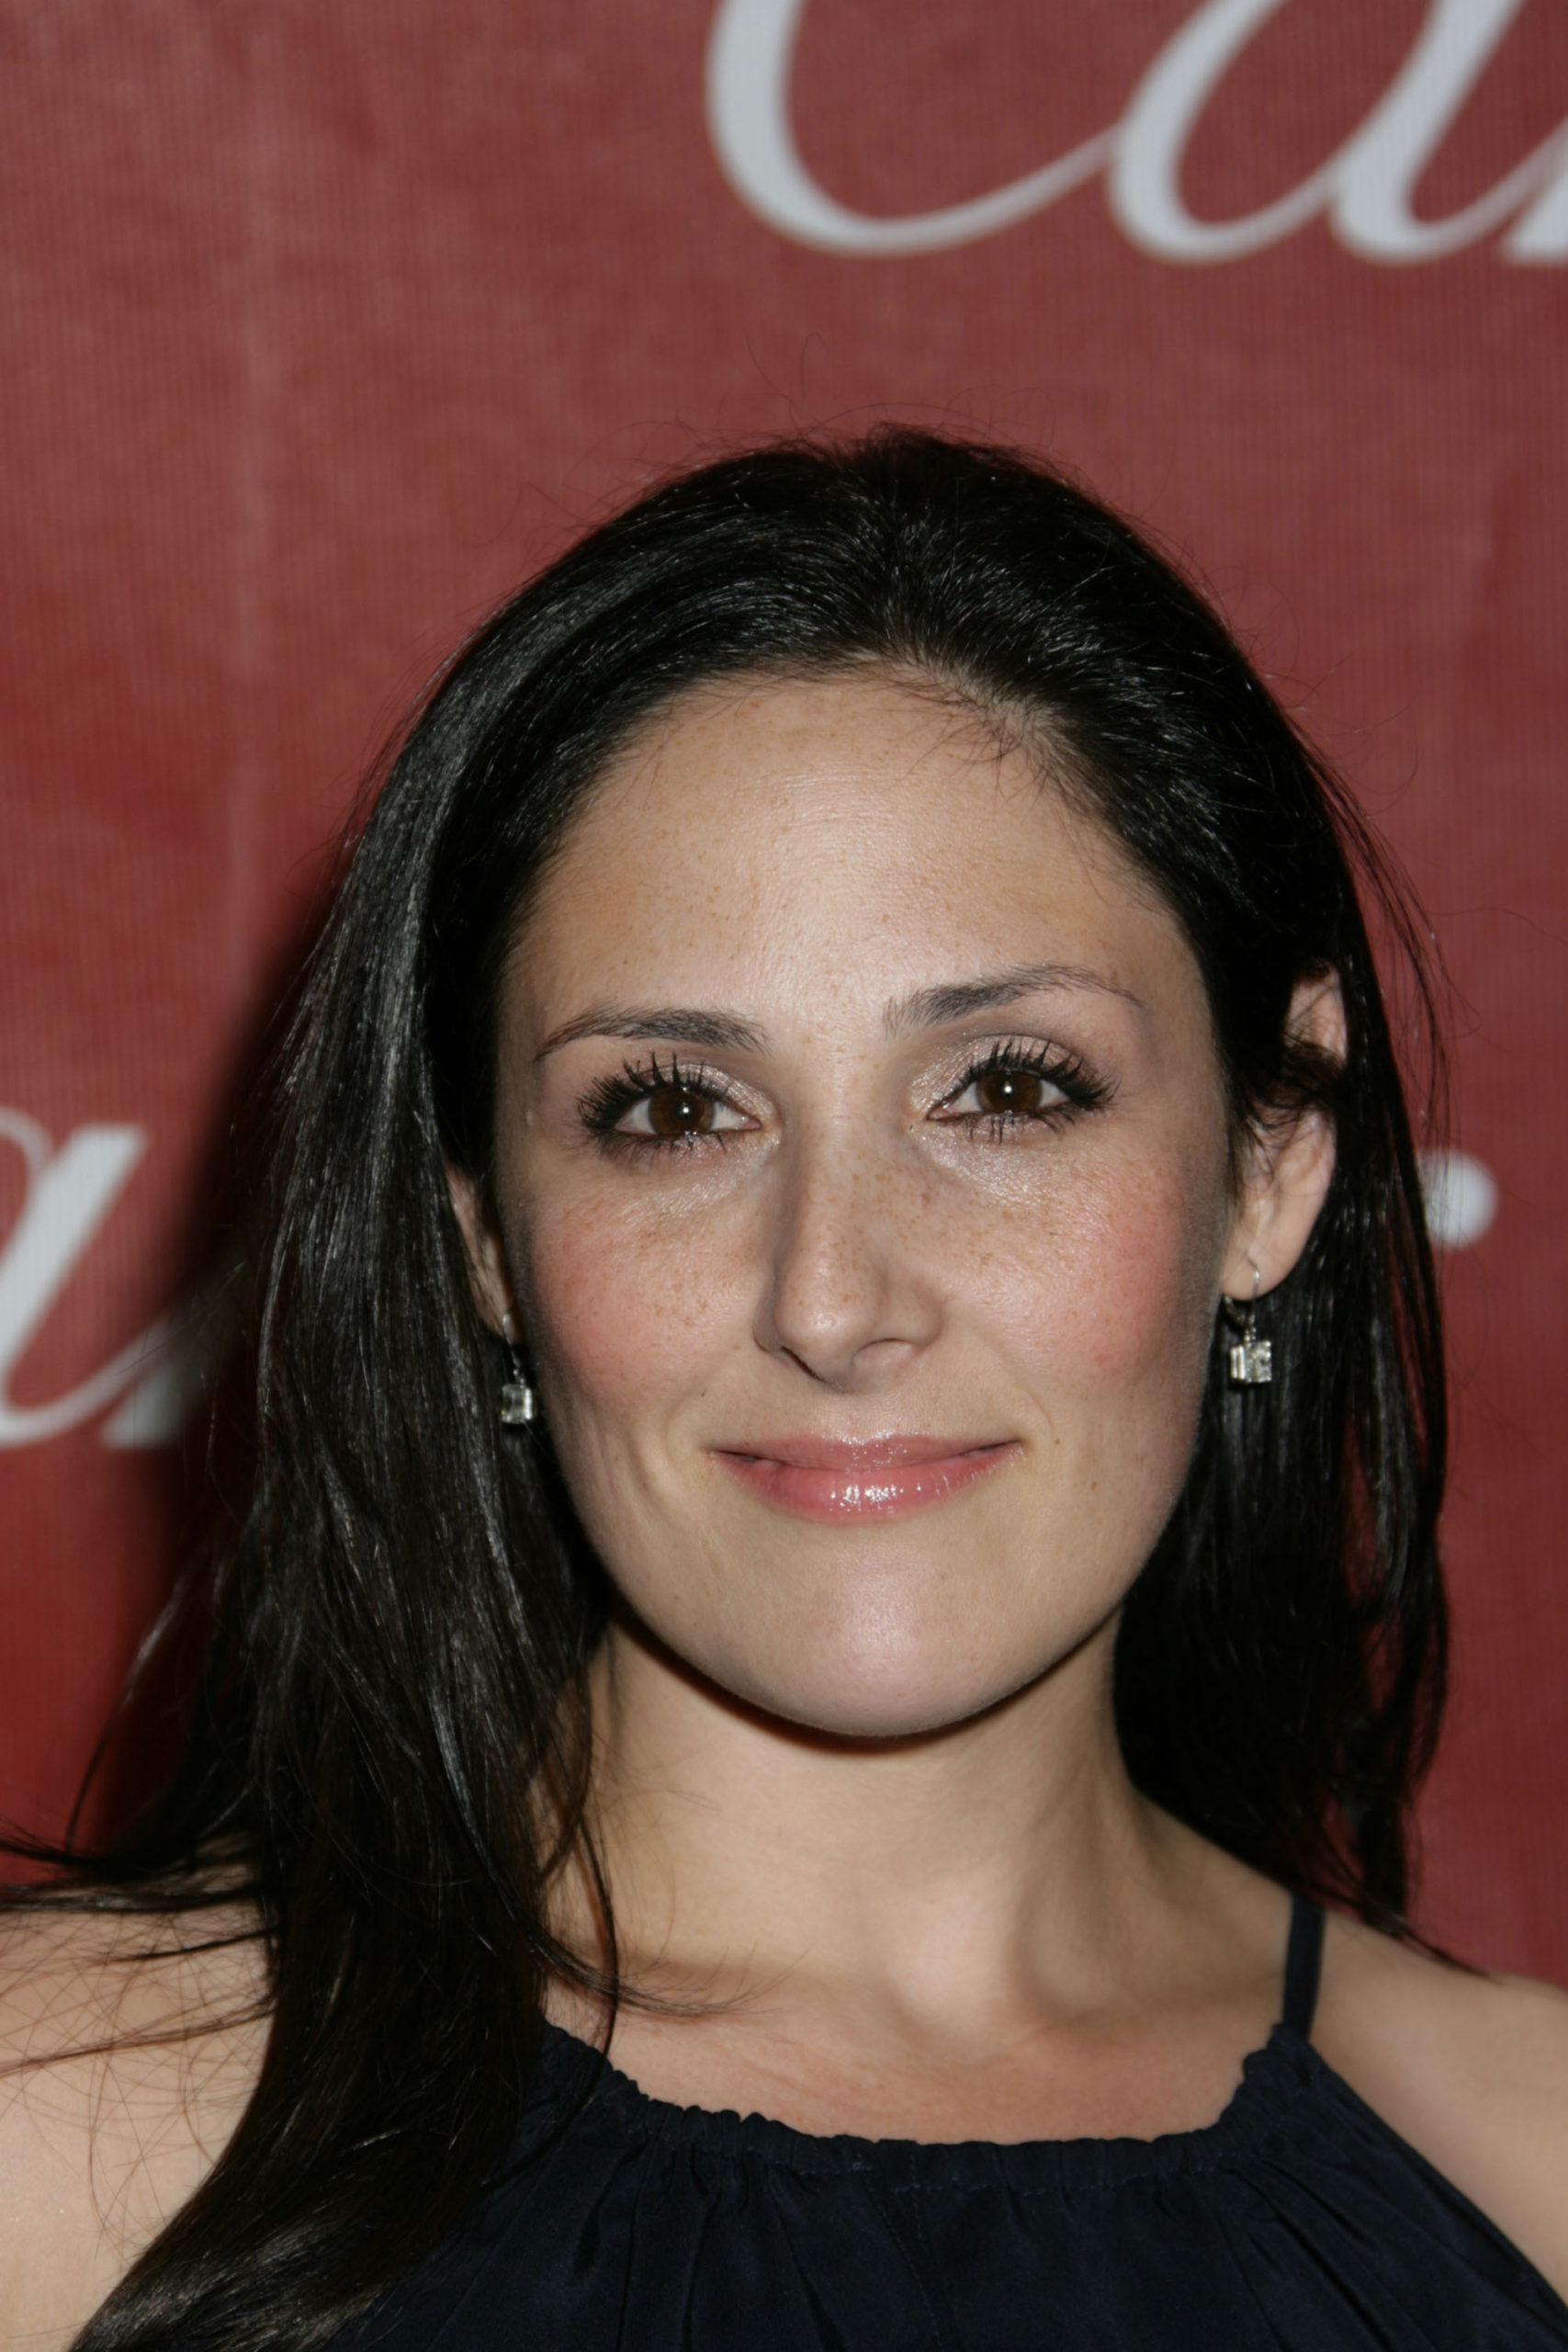 Ricki Lake's successful career and the personal tragedies that shaped